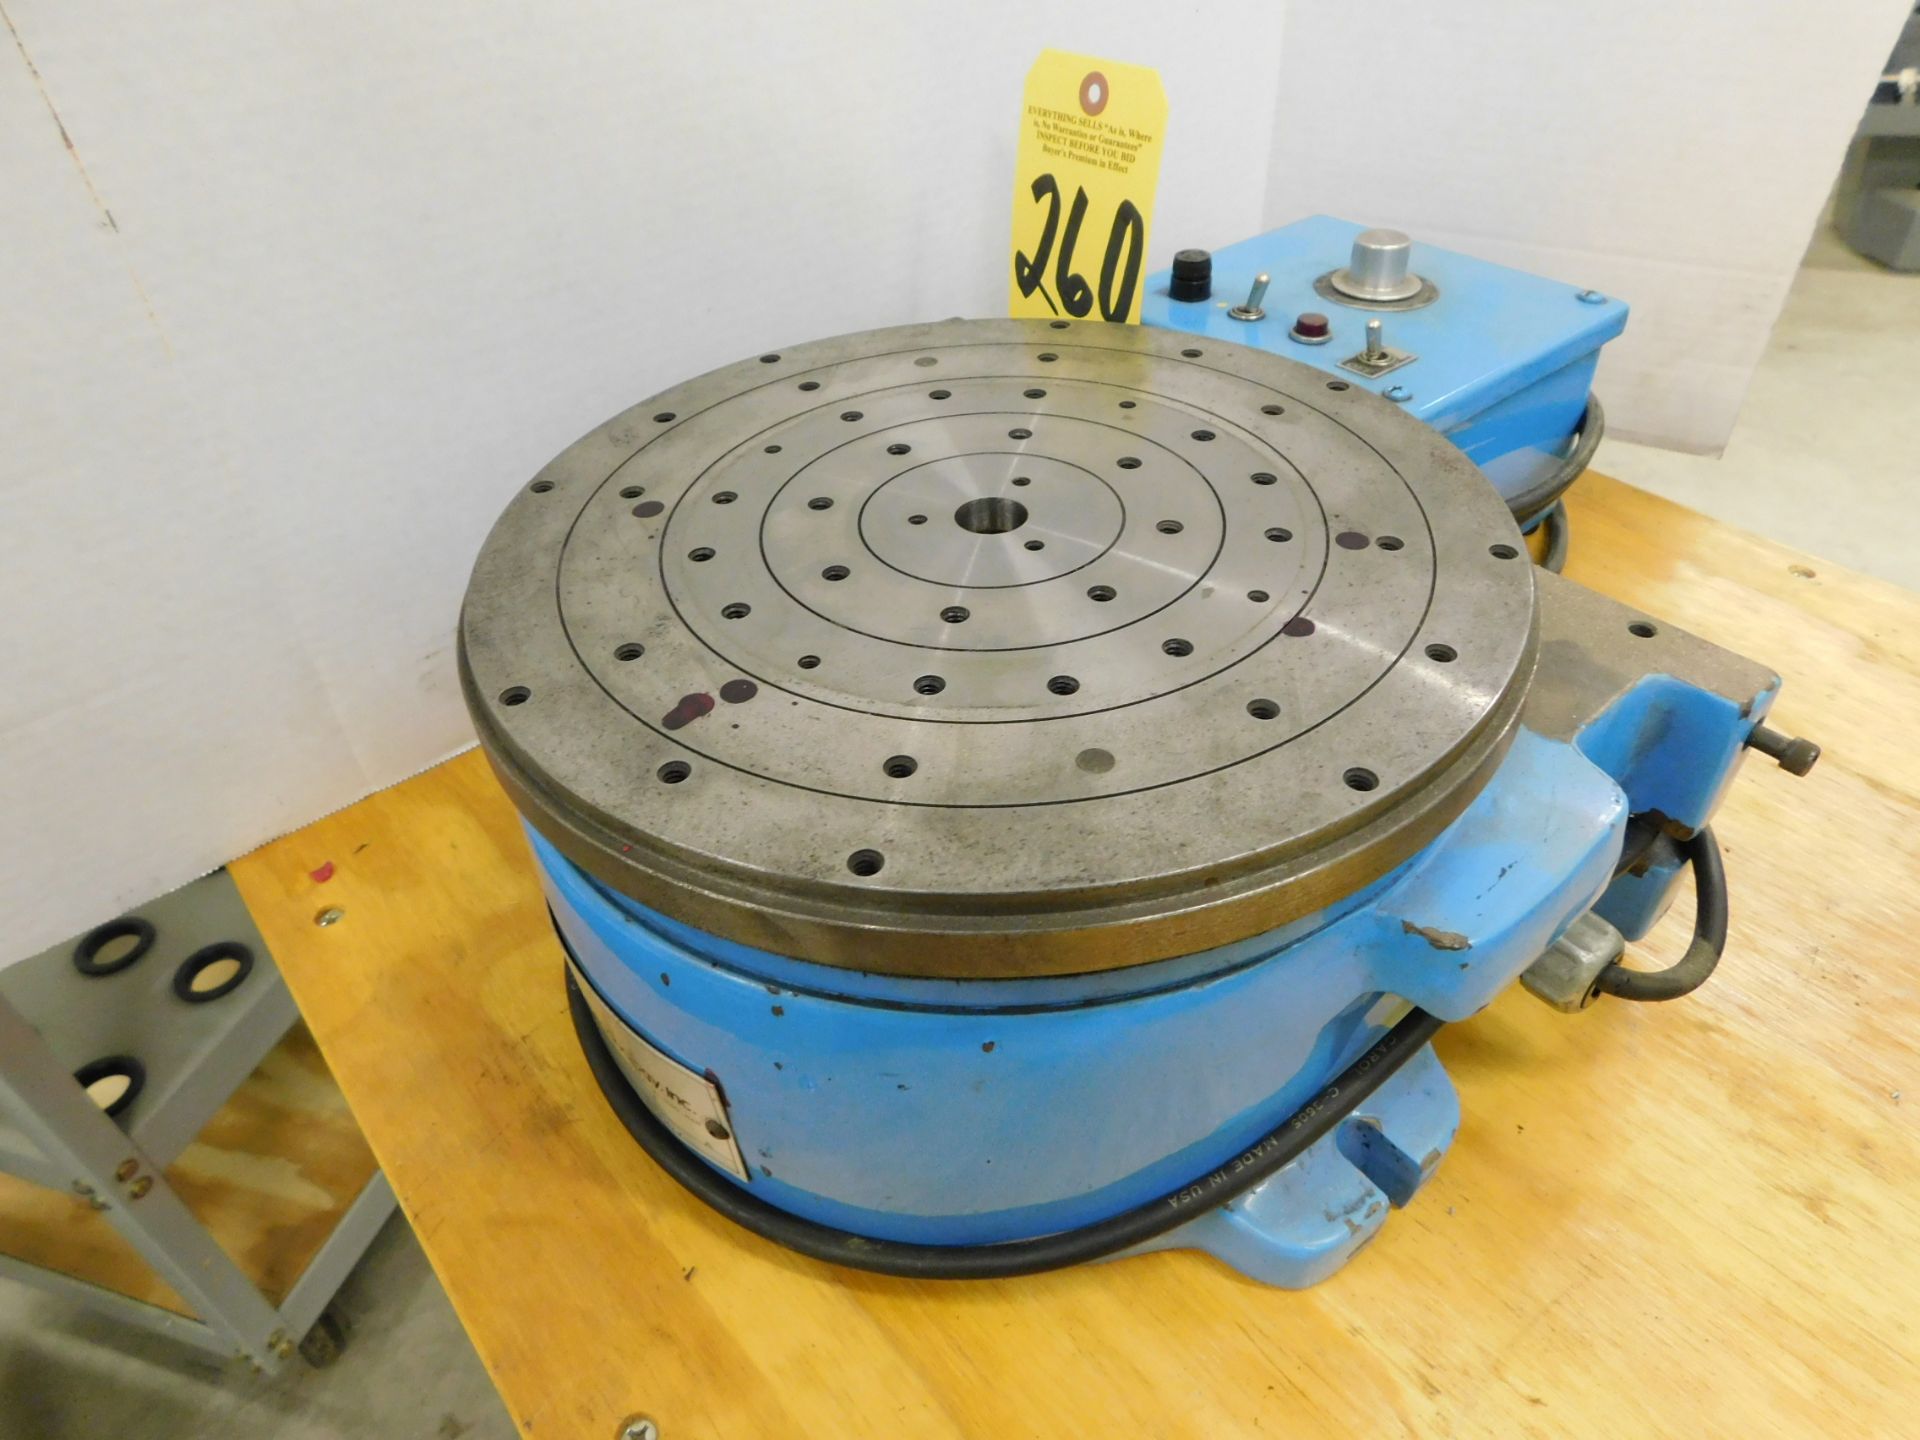 Roto Technology 10 1/2" Diameter Power Rotary Table with Variable Speed Control